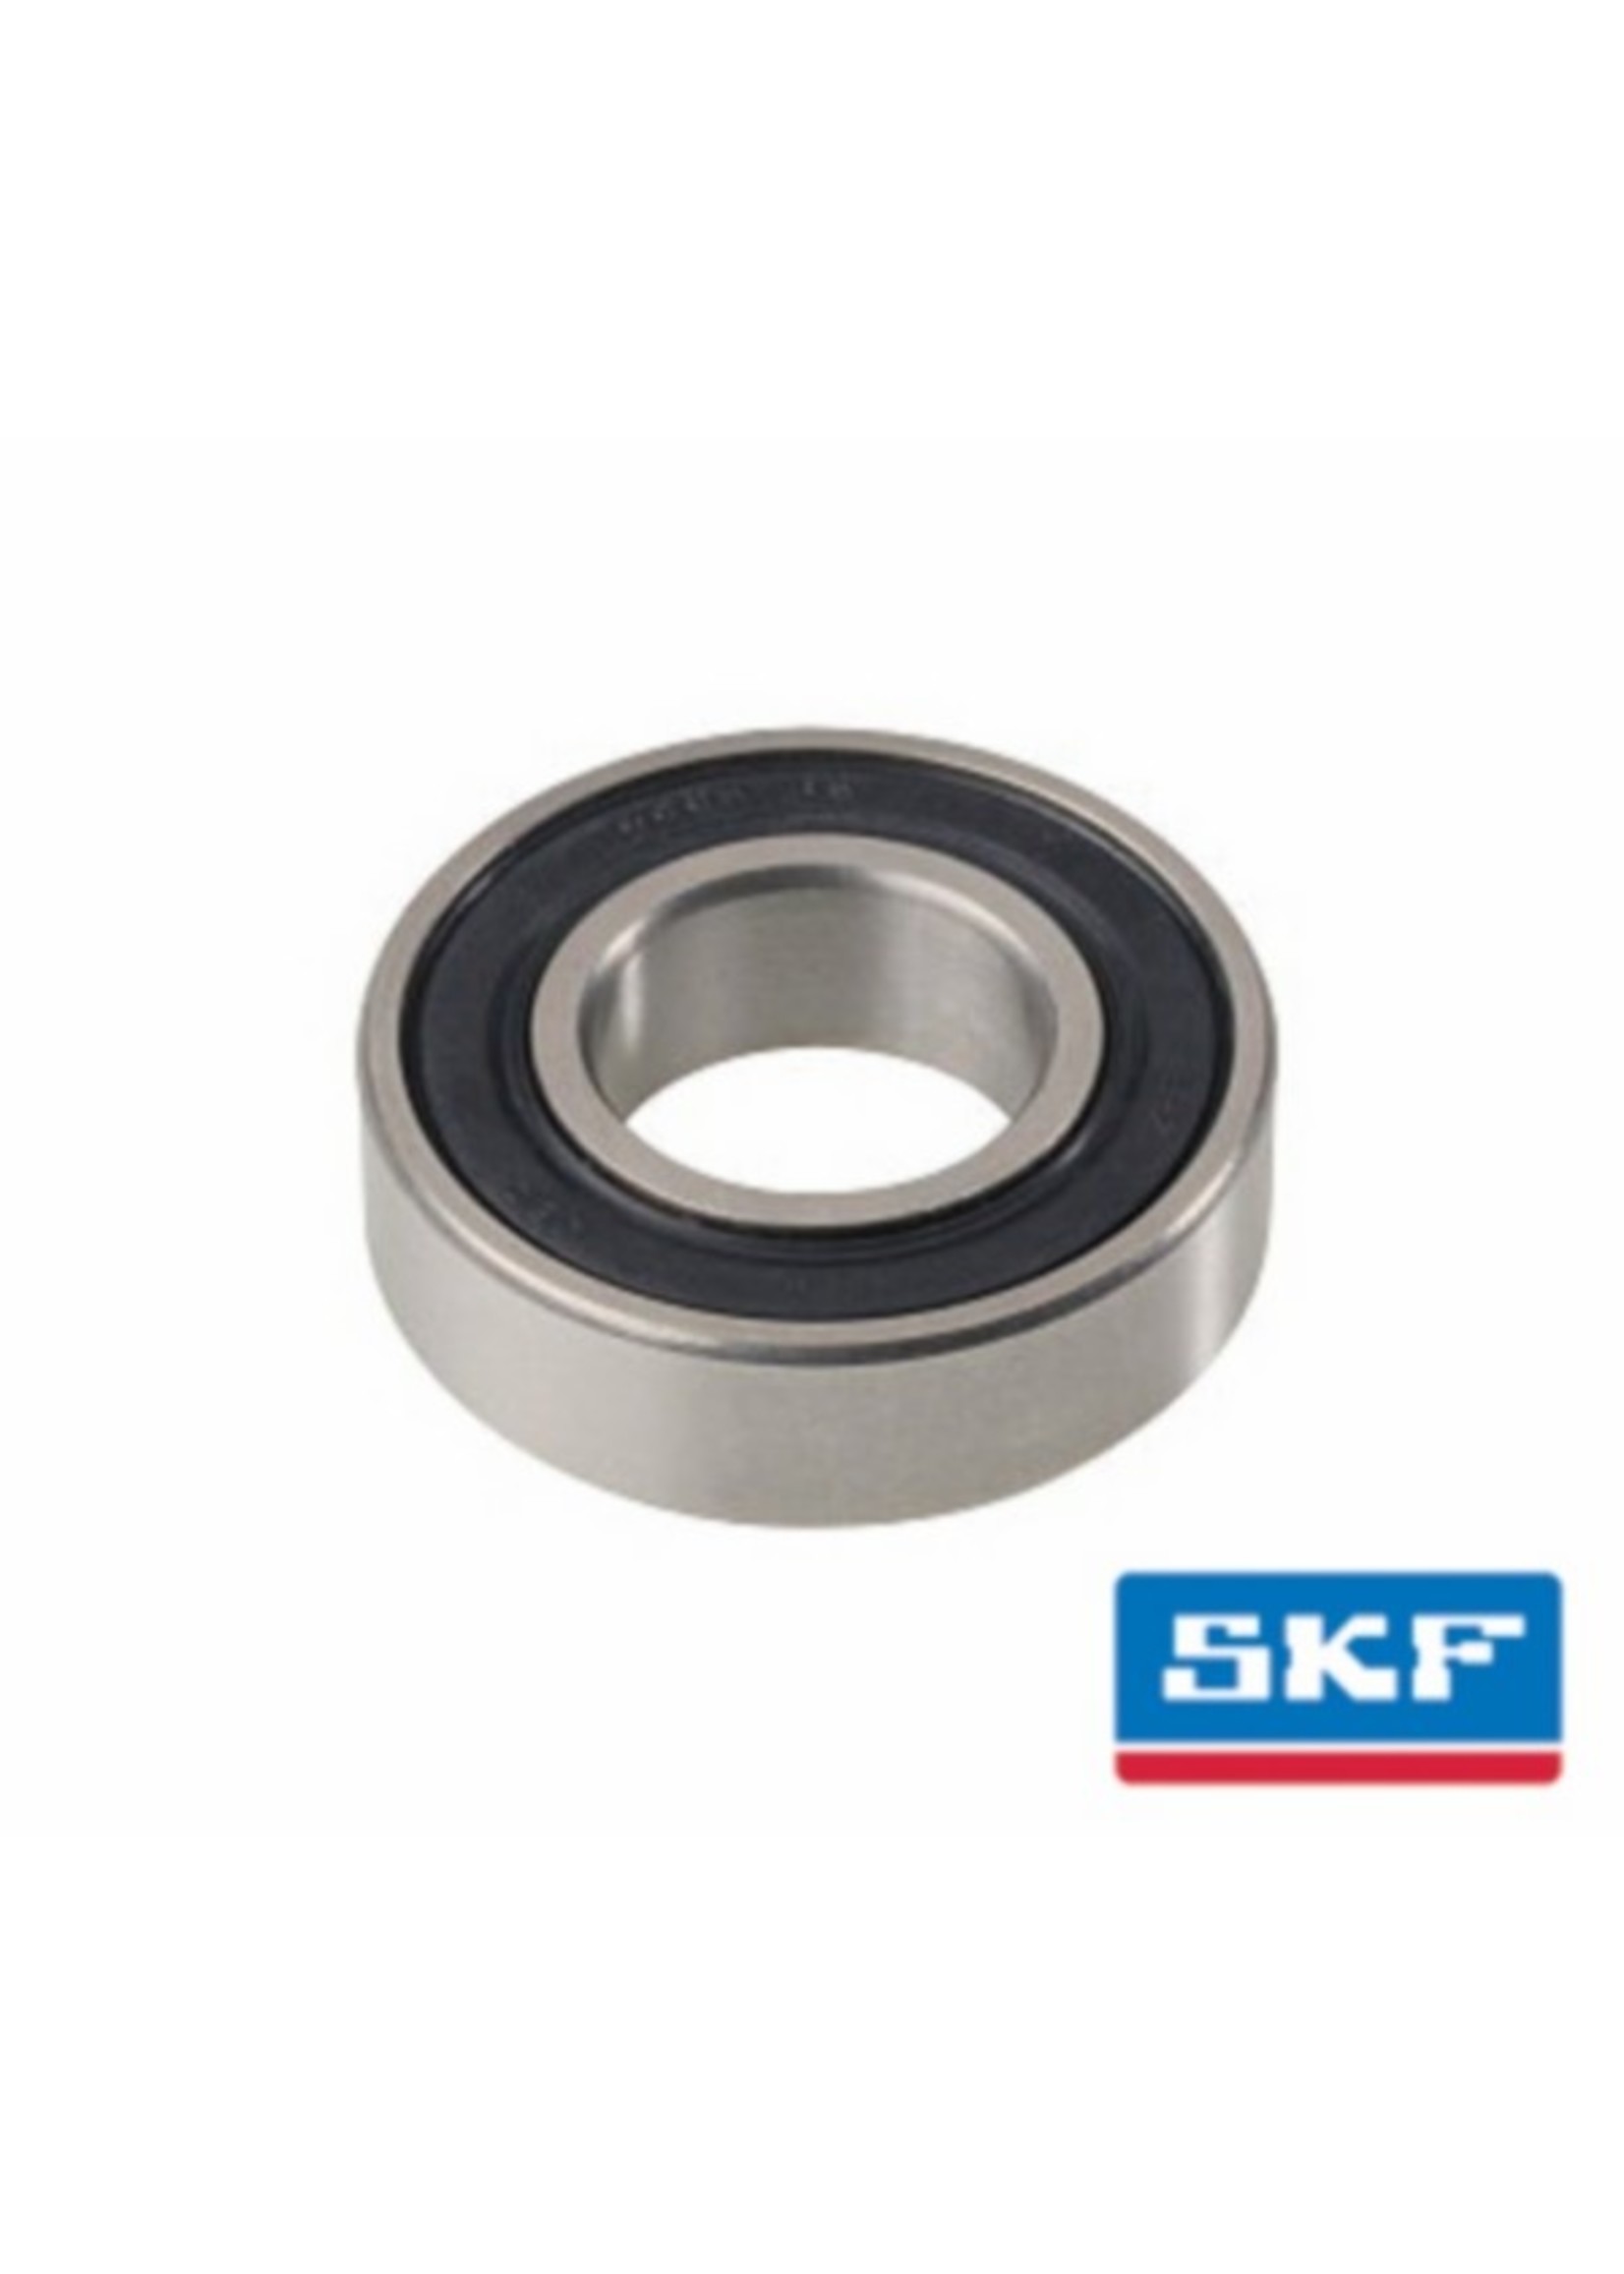 lagers lager 6003 2rs1 17x35x10 skf